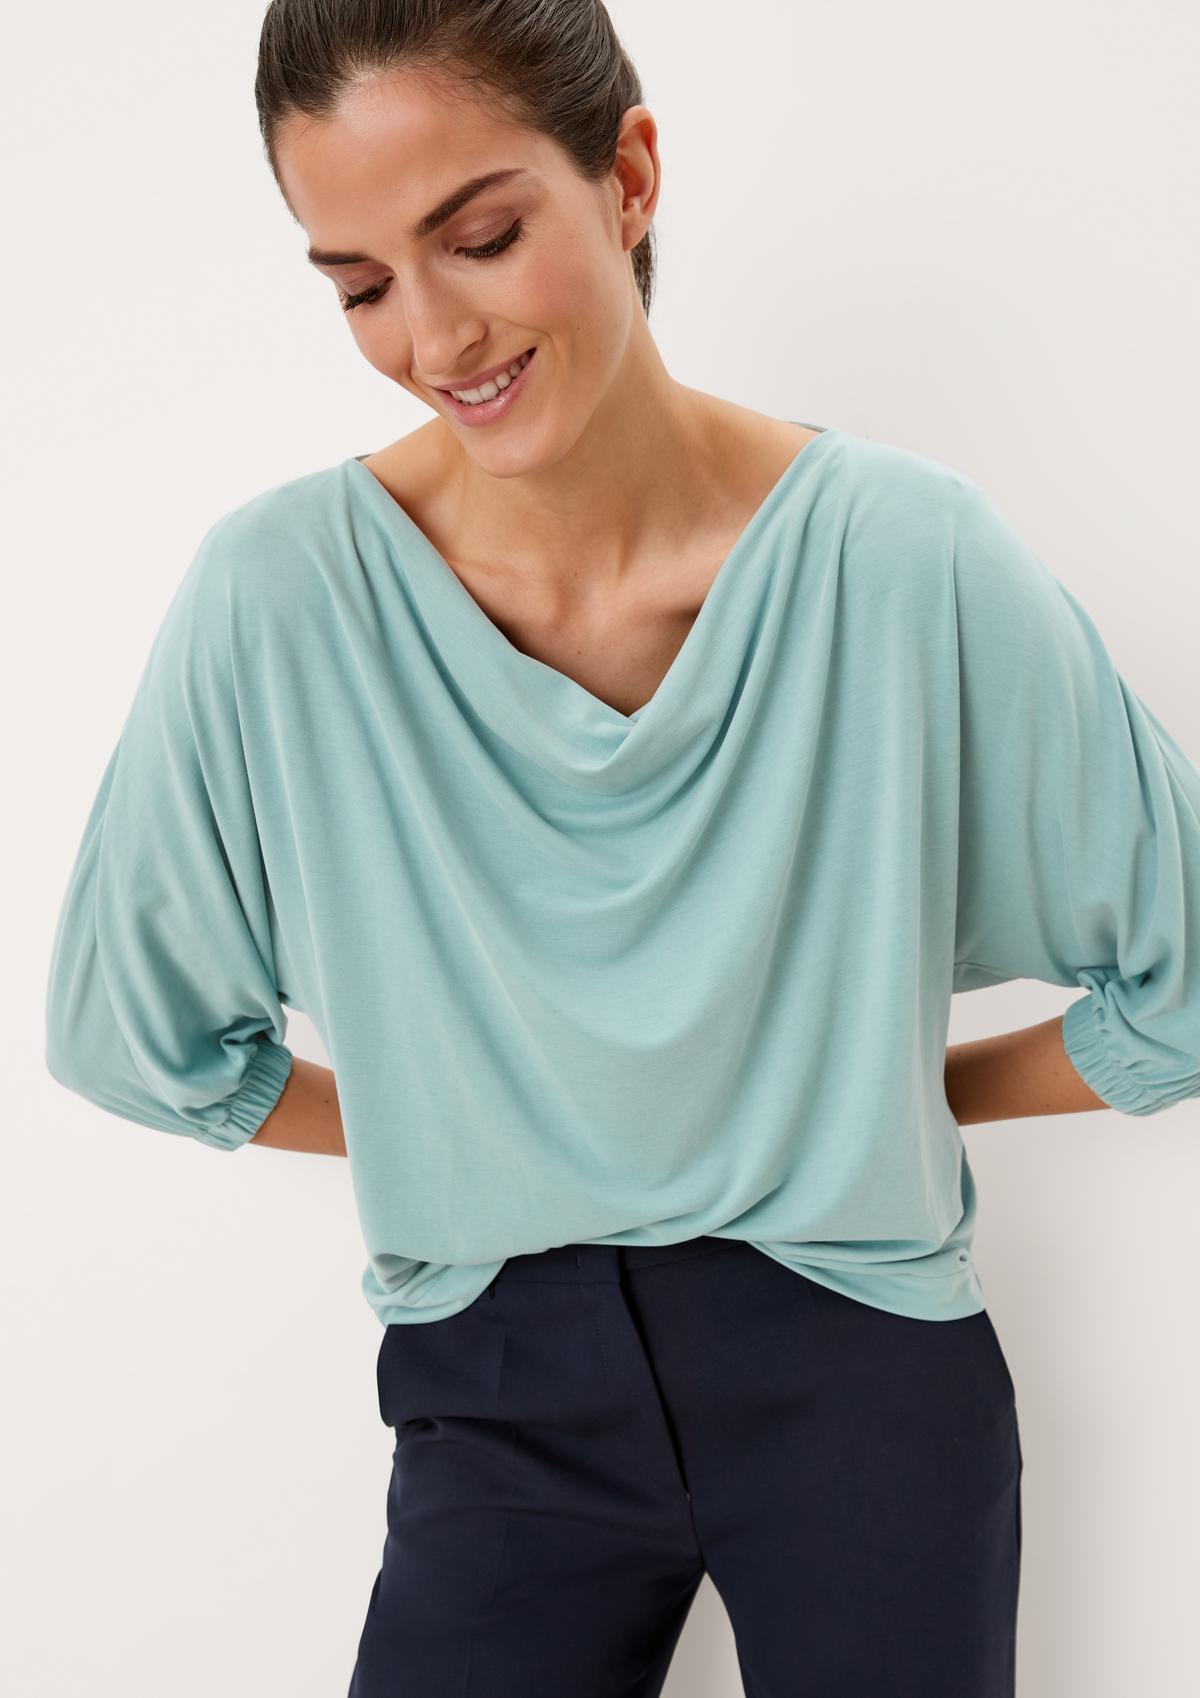 Jersey top with a cowl neckline